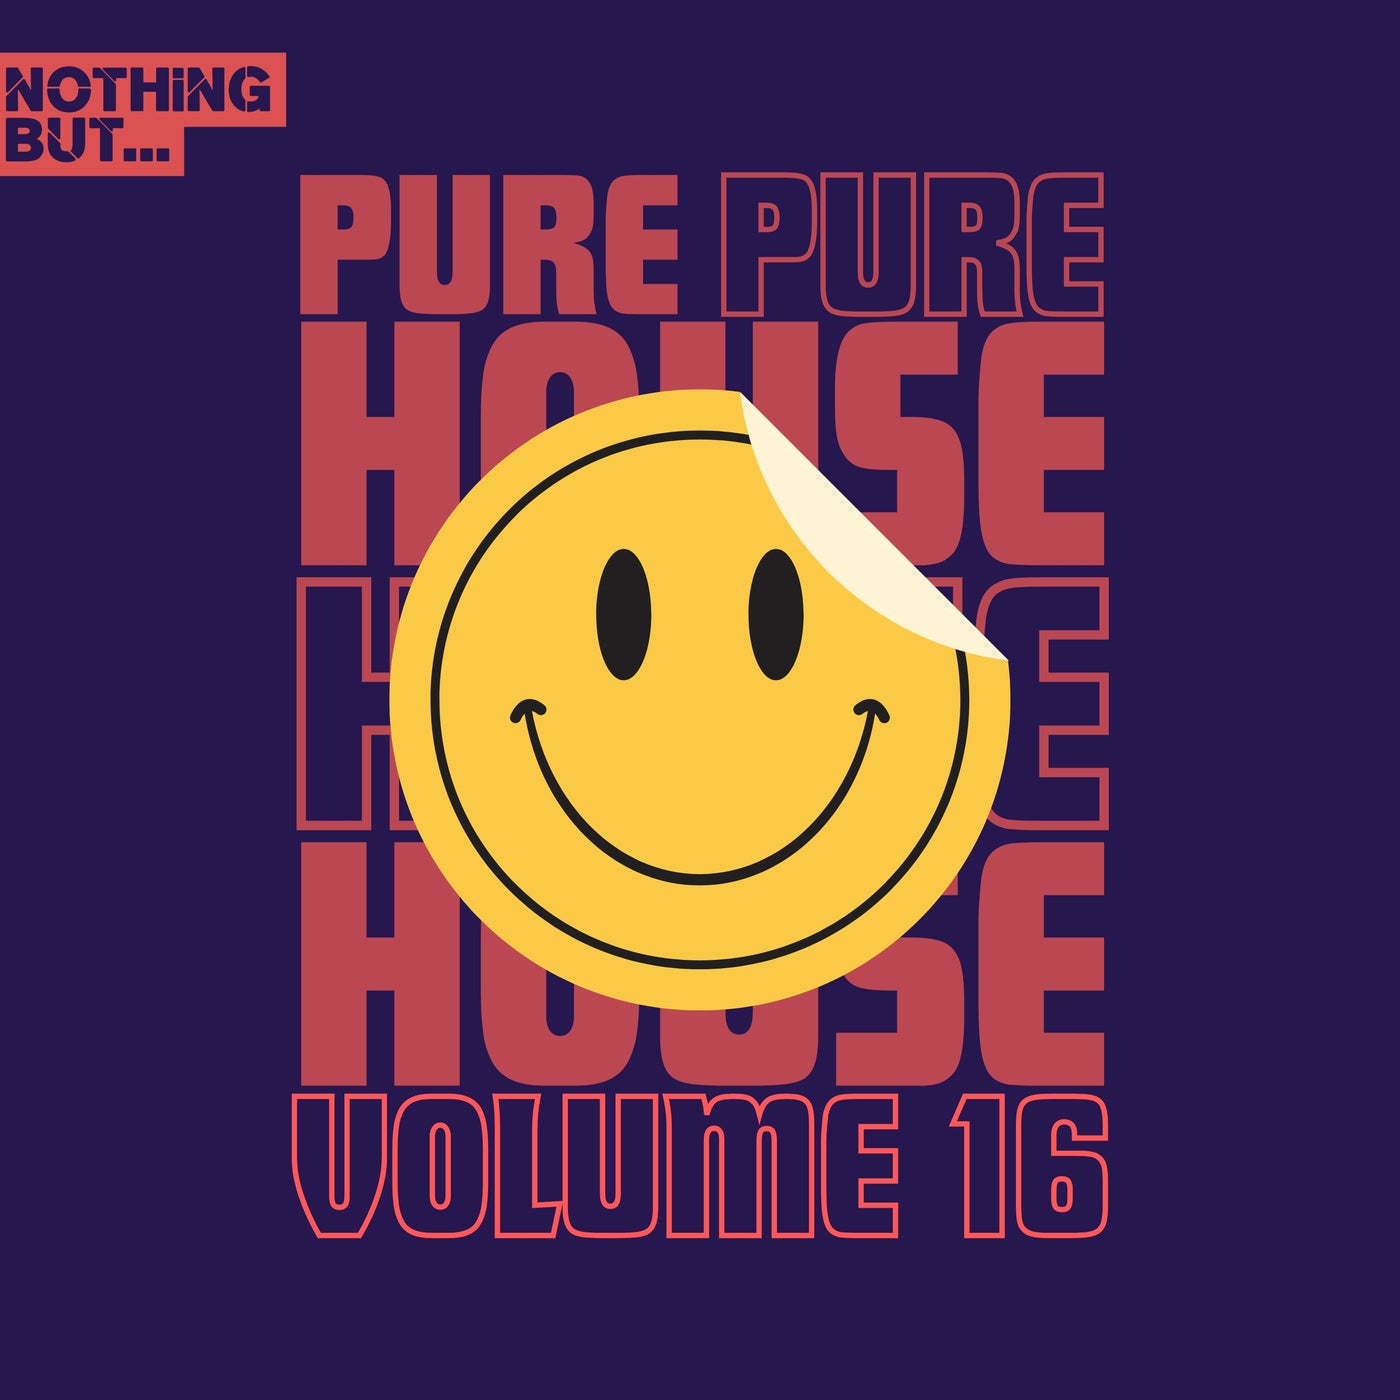 Nothing But... Pure House Music, Vol. 16